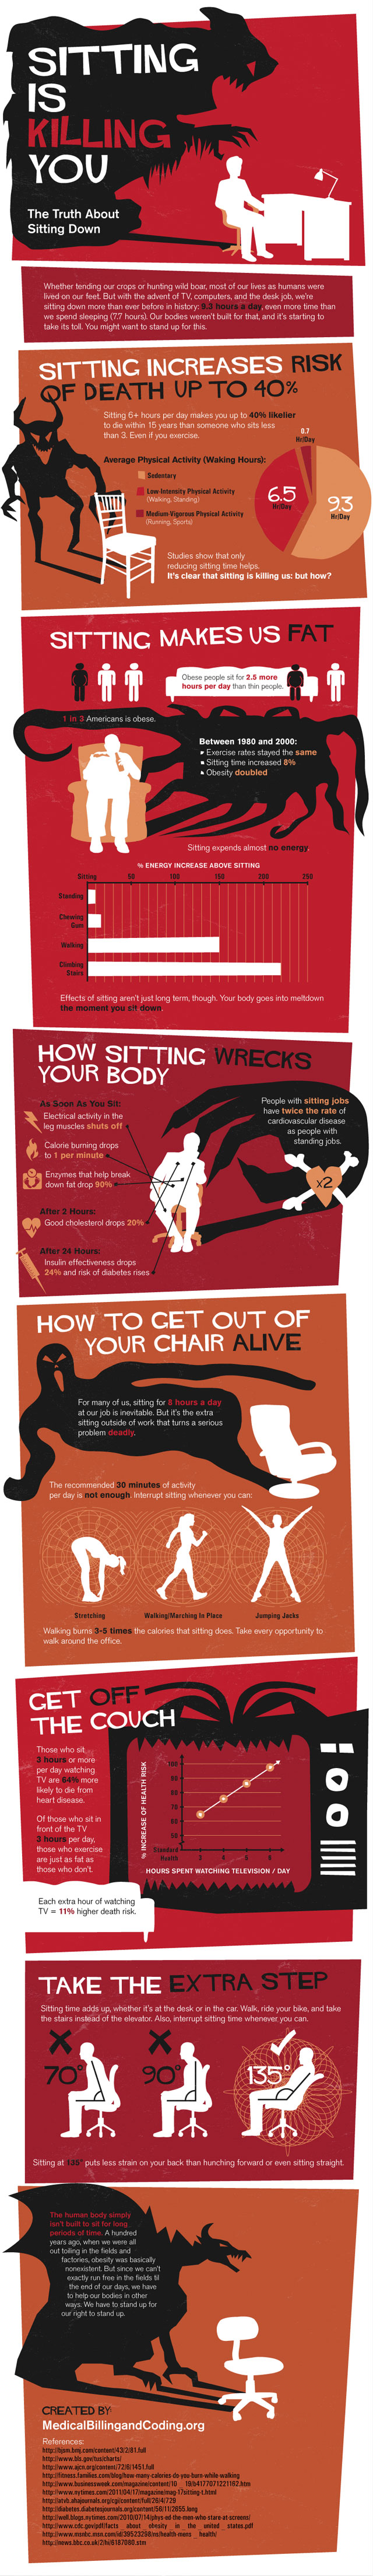 The Truth About Sitting Down Infographic